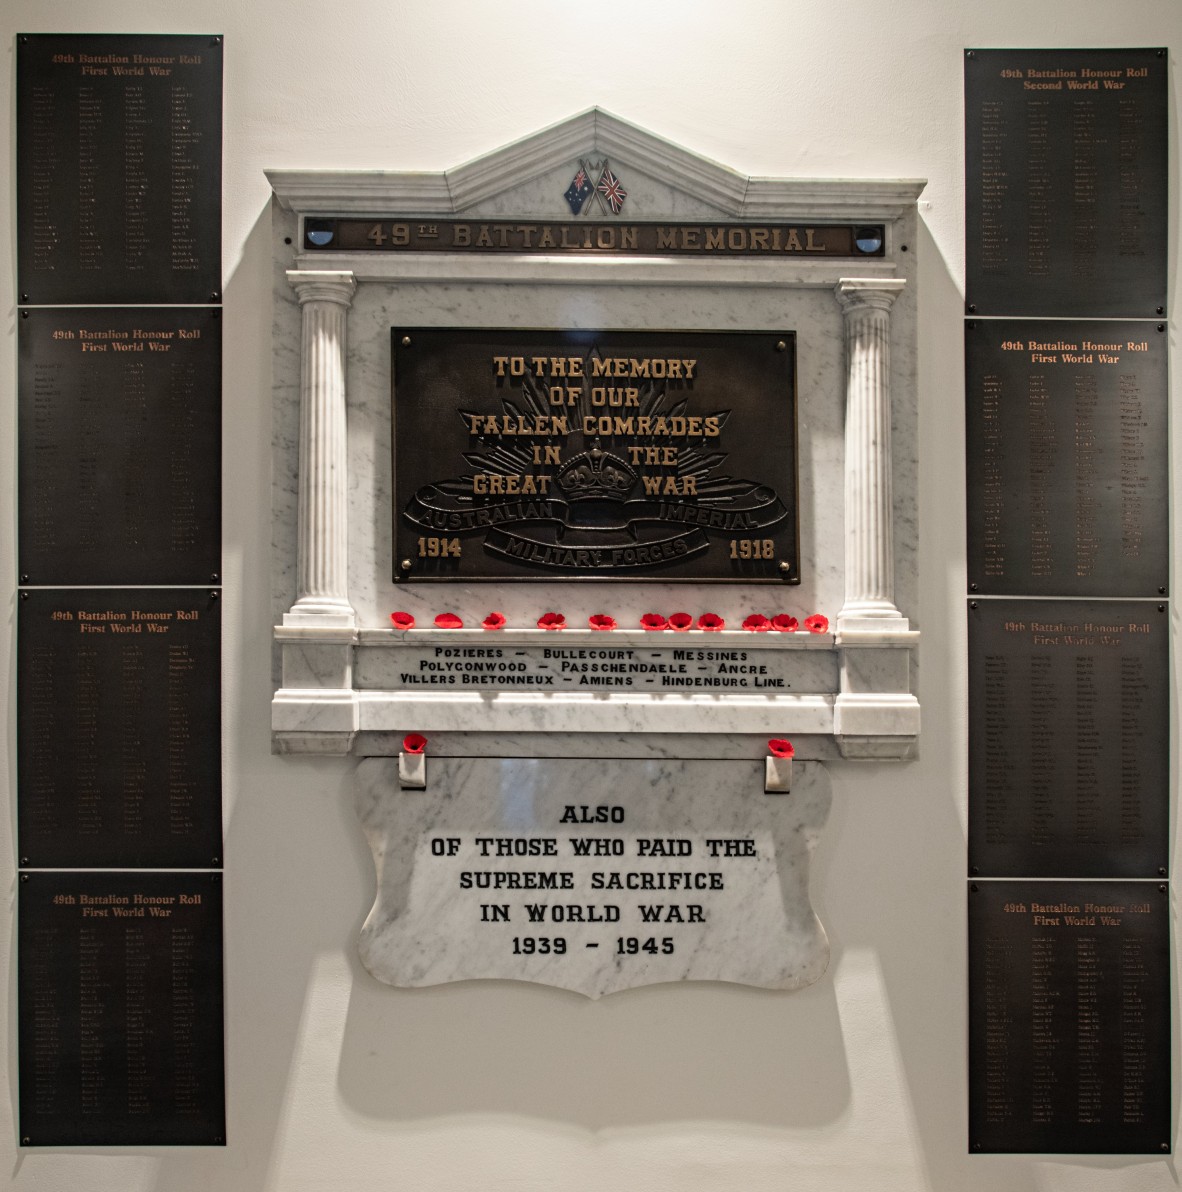 The 49th Battalion plaque and honour rolls at Anzac Square Memorial Galleries.